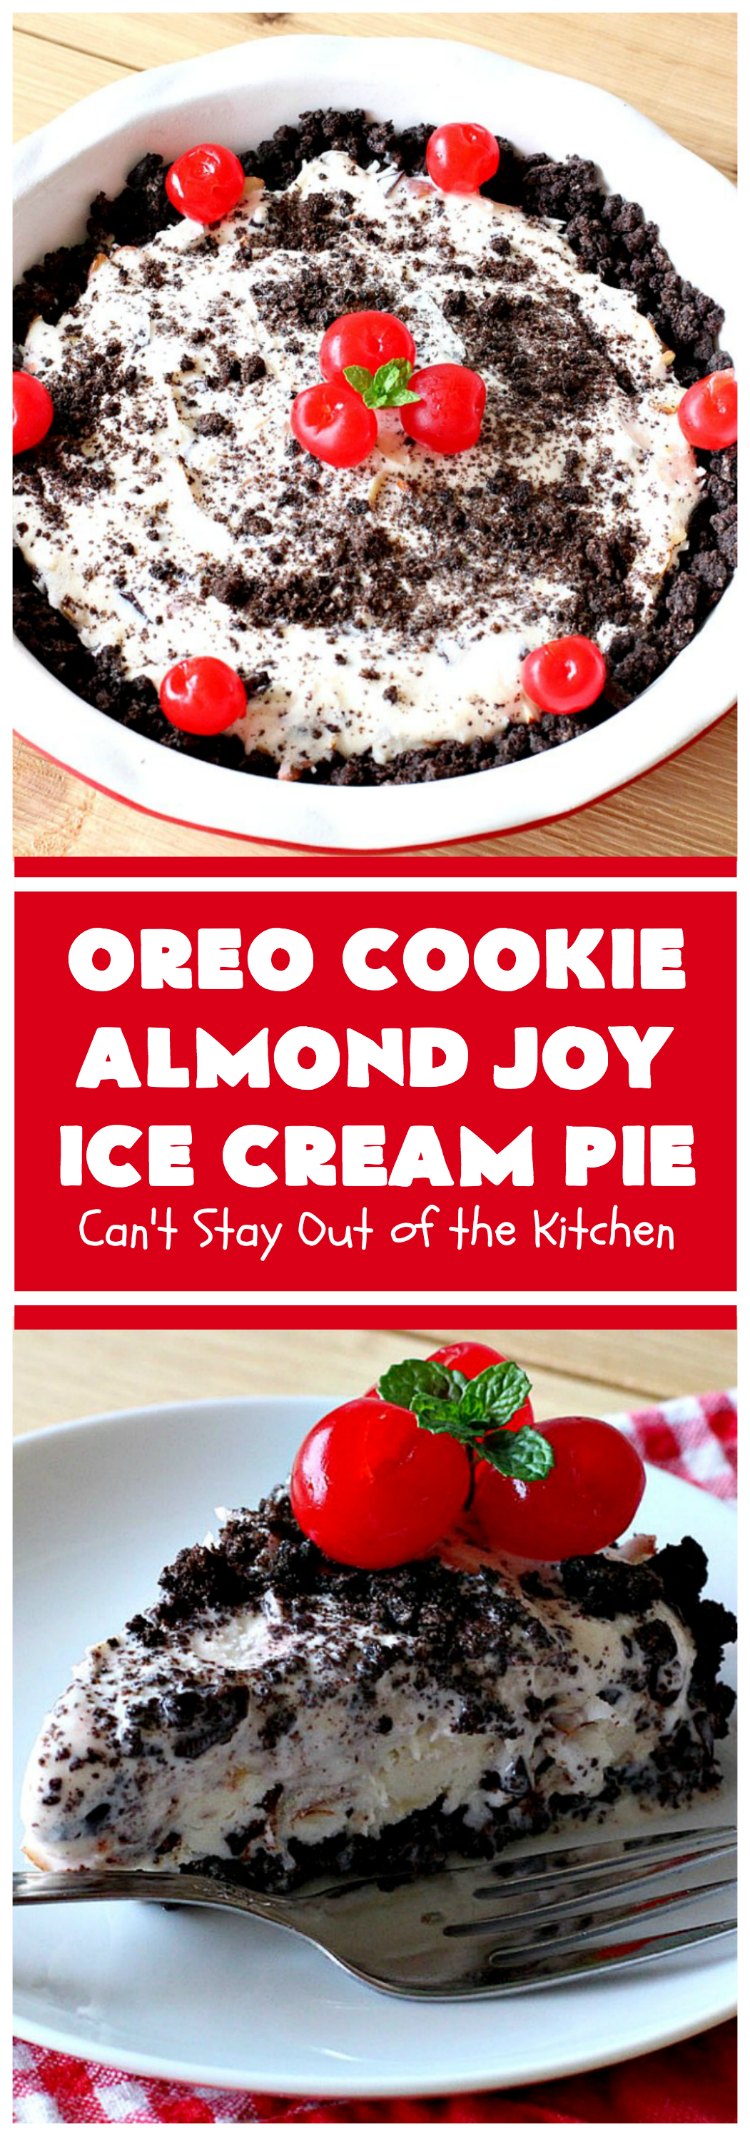 Oreo Cookie Almond Joy Ice Cream Pie | Can't Stay Out of the Kitchen | Wow your family and friends with this spectacular #IceCreamPie for #ValentinesDay! It combines the best of #Oreos with #AlmondJoyBars! Plus, it's a super easy 5-ingredient #dessert to die for! #Holiday #Pie #HolidayDessert #ChocolateDessert #OreoDessert #AlmondJoyDessert #ChocolatePie #OreoPie #IceCream #AlmondJoyPie #OreoCookieAlmondJoyIceCreamPie